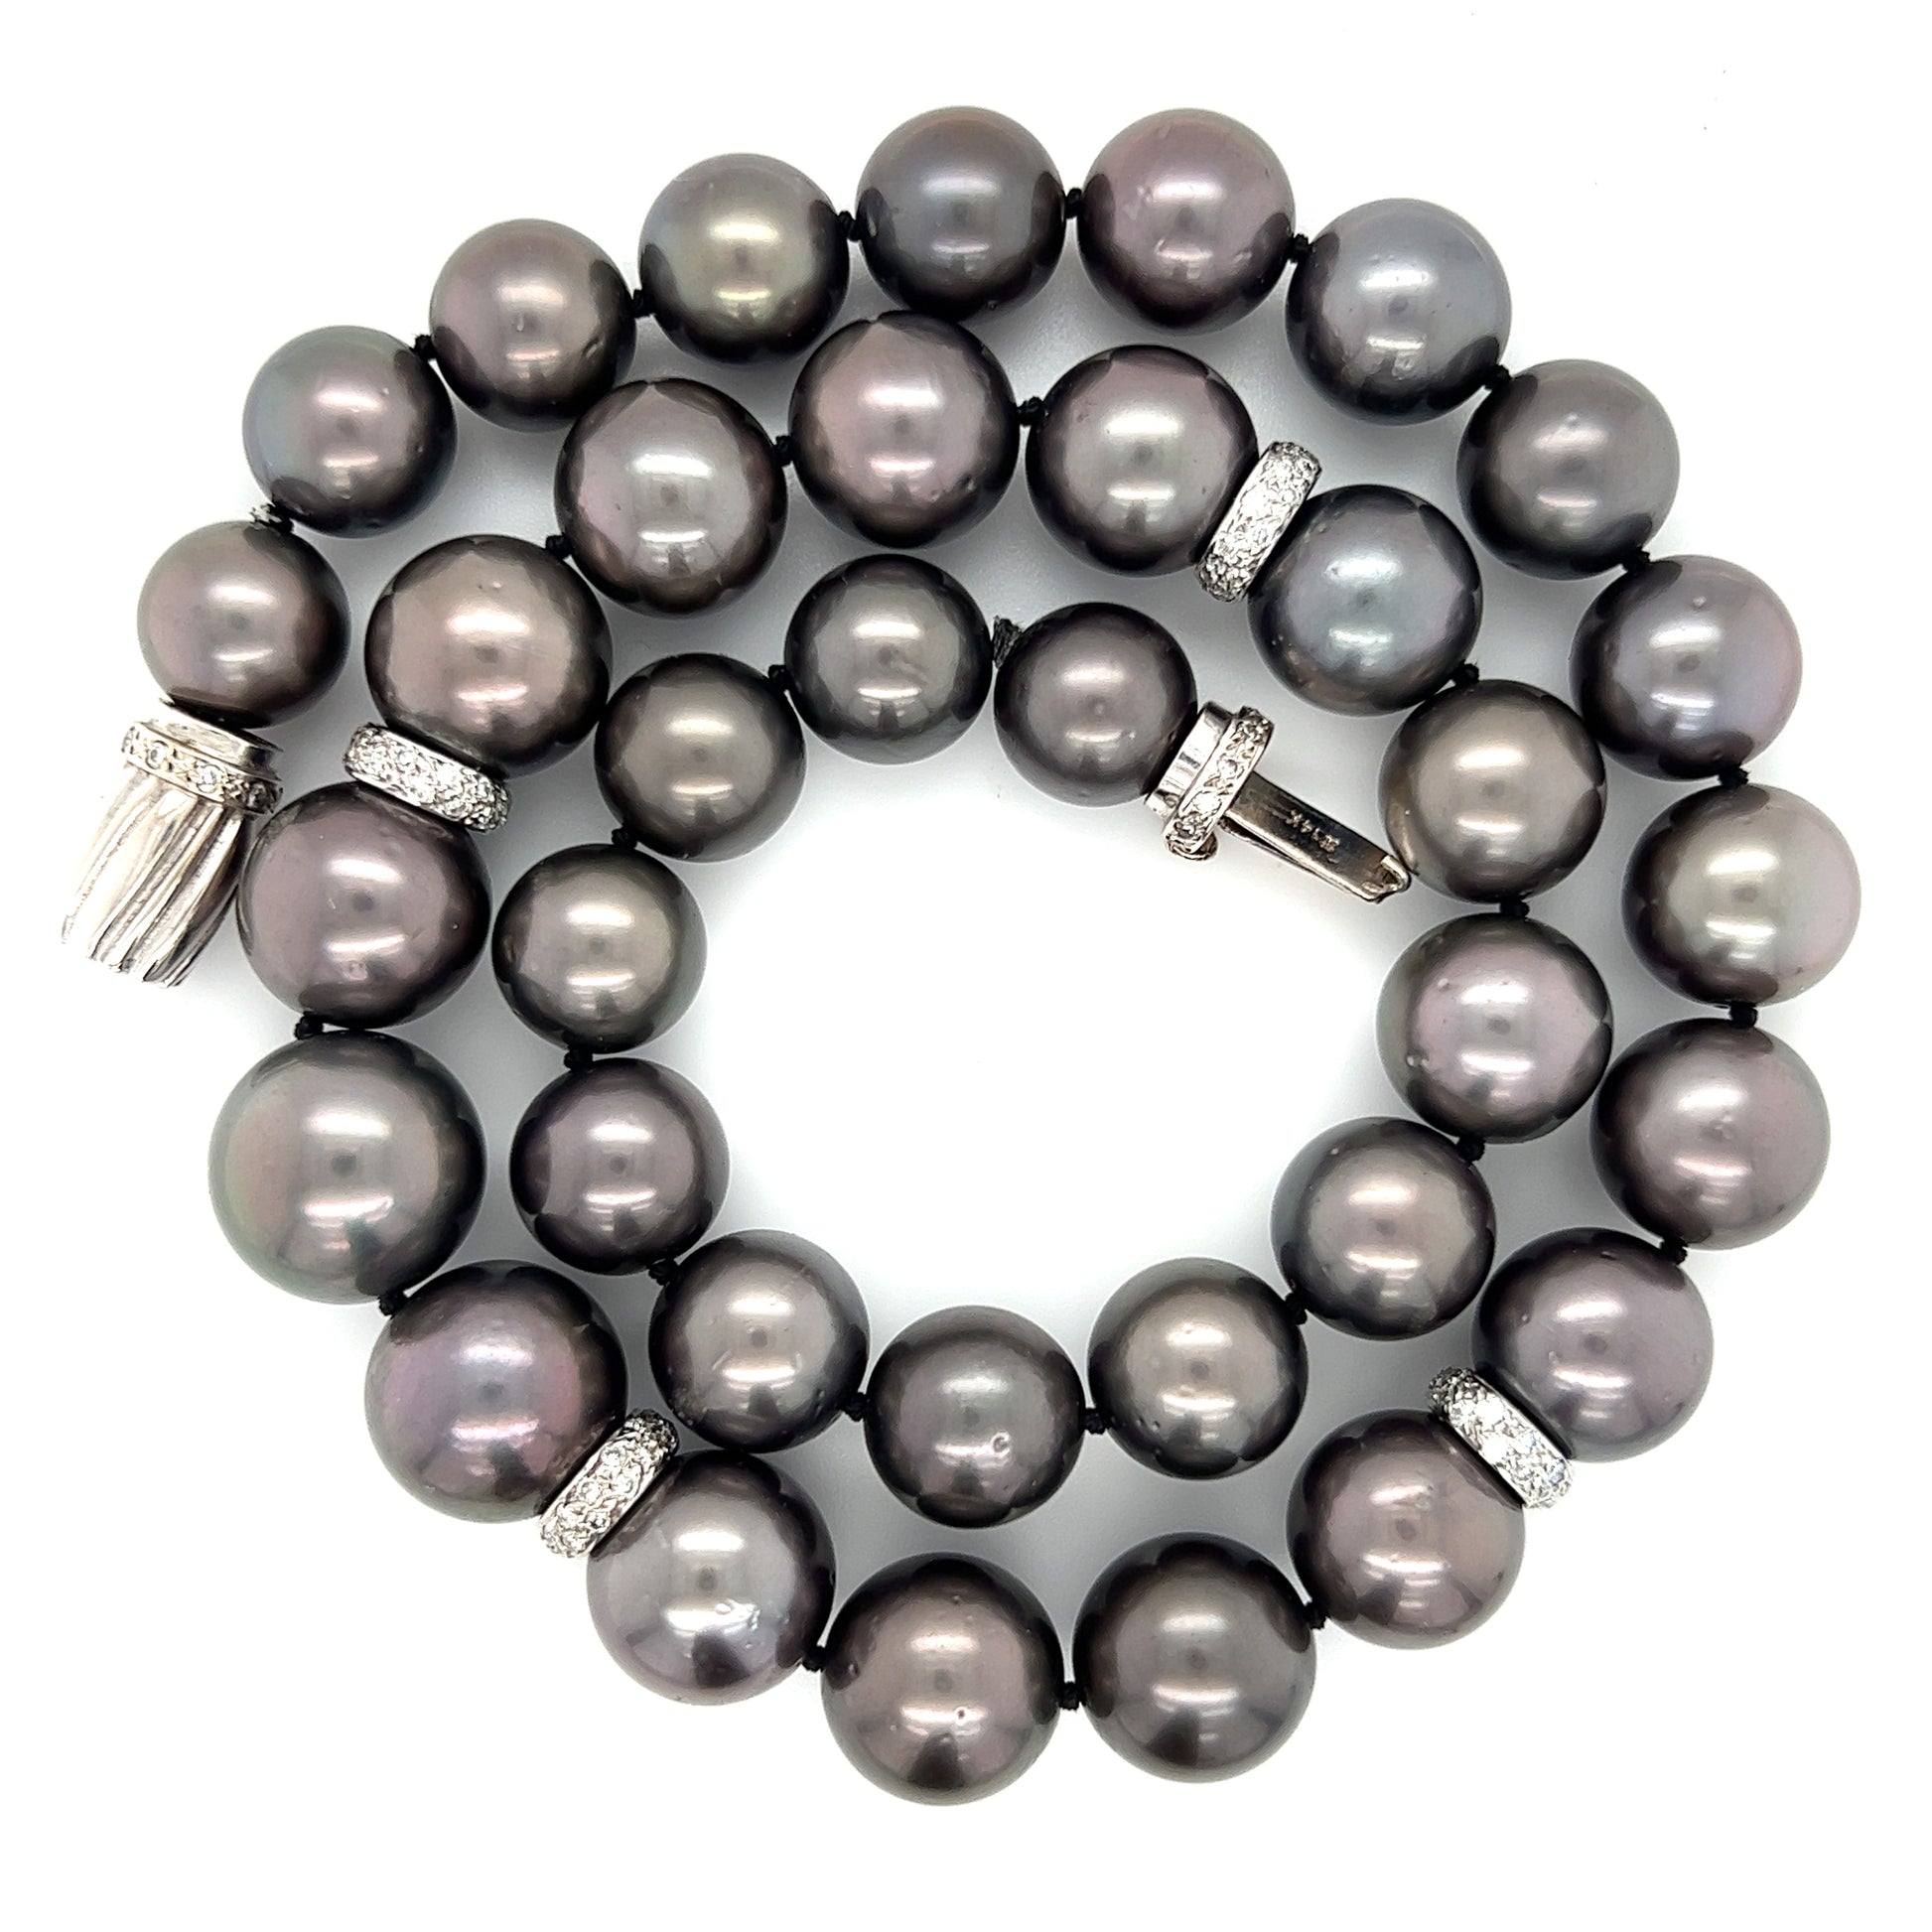 Tahitian Black Pearl Necklace with Four Diamond Rondelle and 14K White Gold Catch. Full Necklace Alternative View